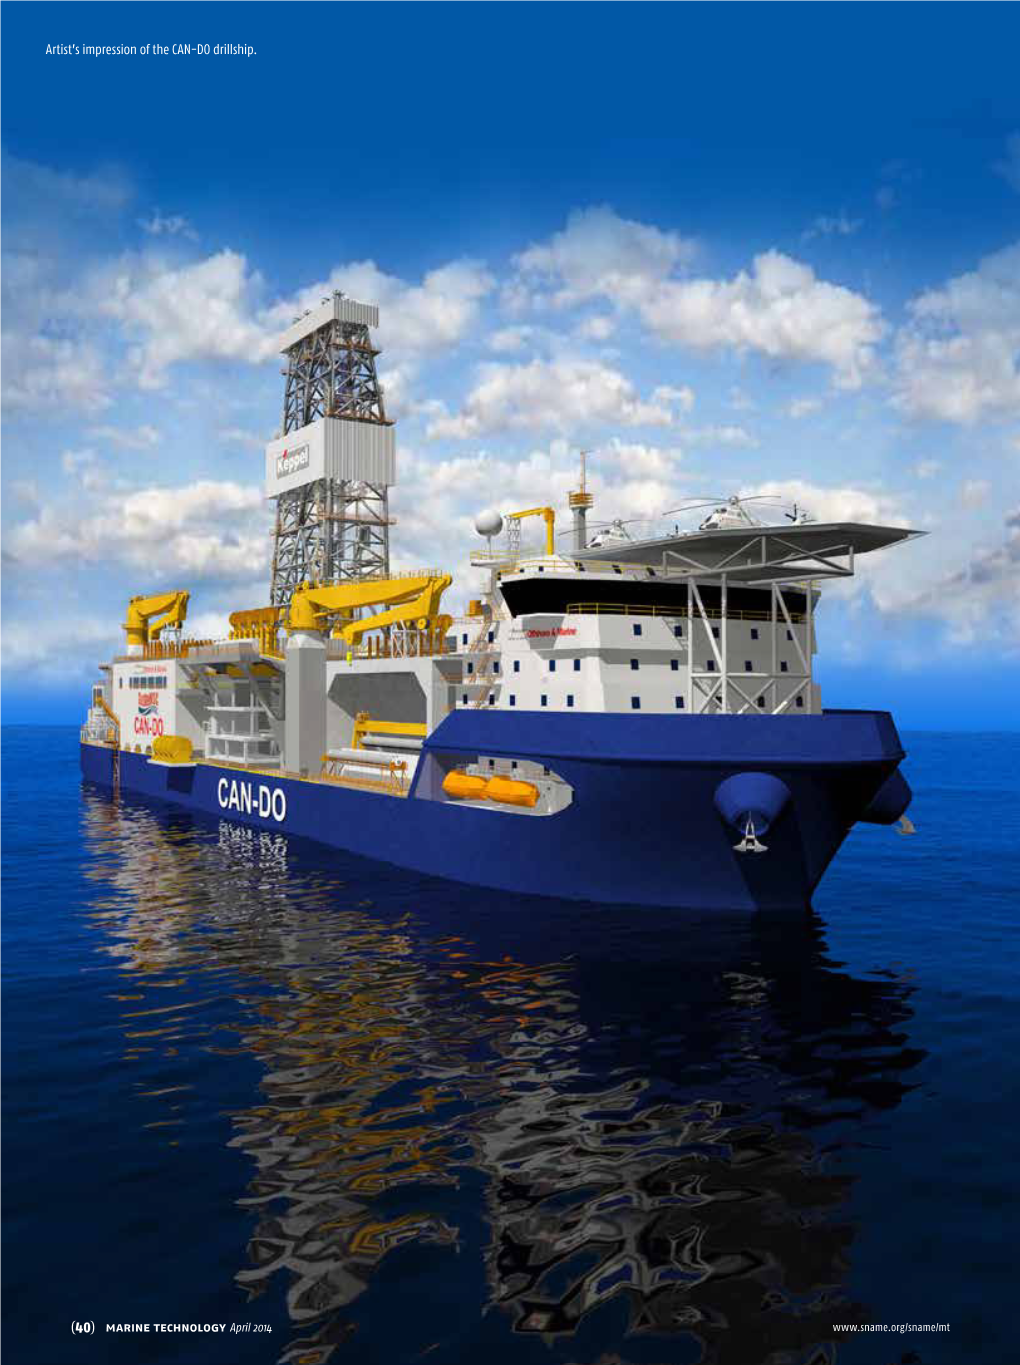 Artist's Impression of the CAN-DO Drillship